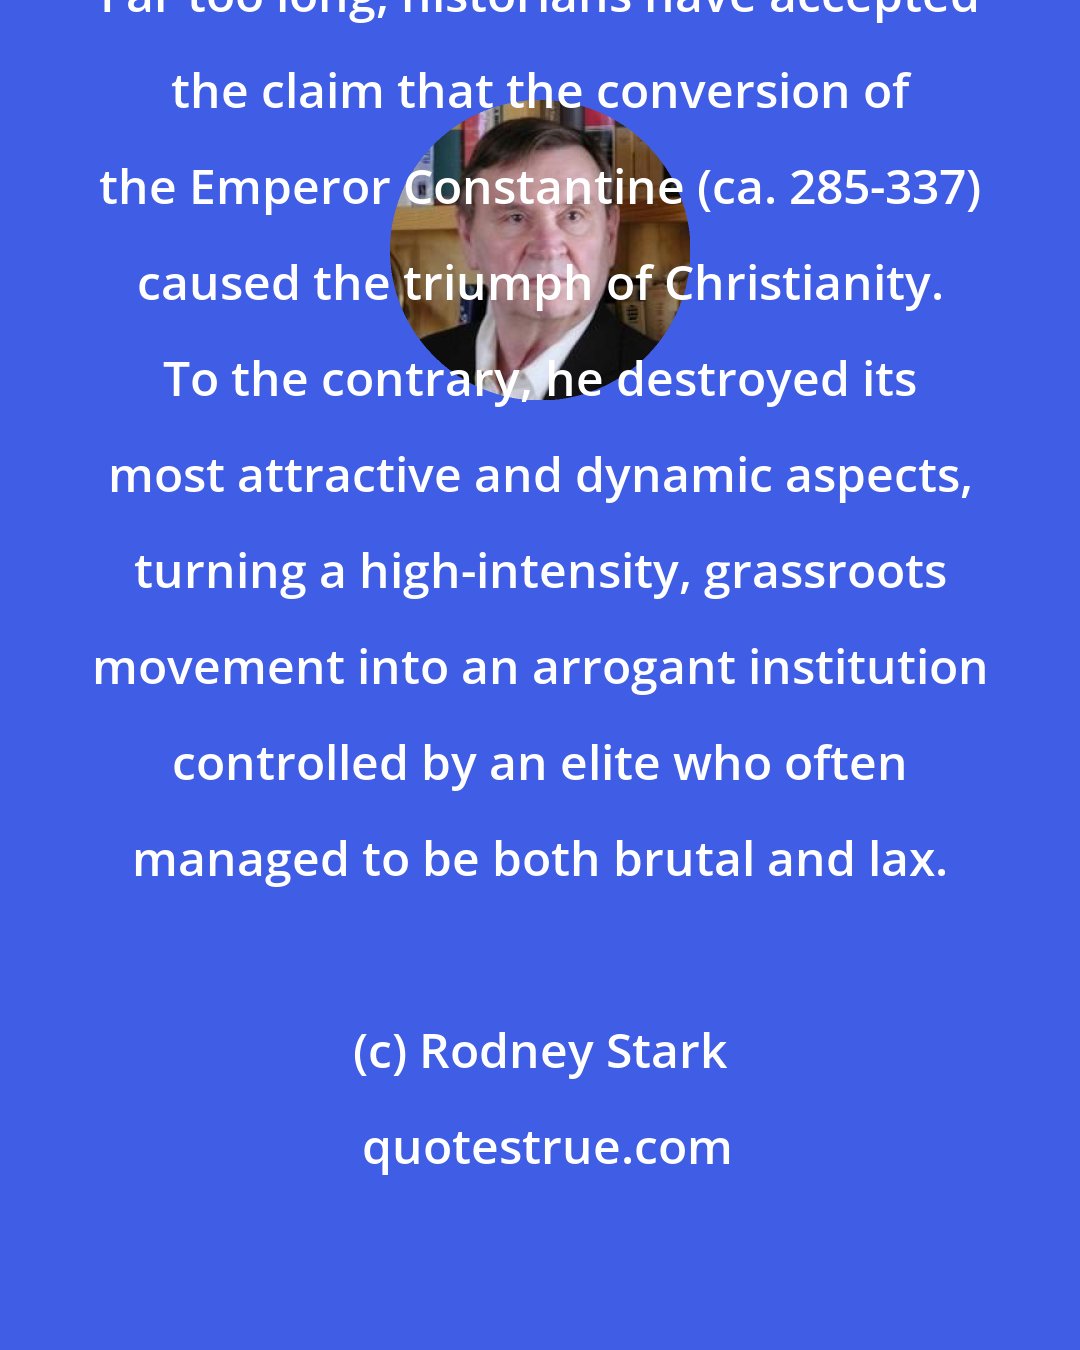 Rodney Stark: Far too long, historians have accepted the claim that the conversion of the Emperor Constantine (ca. 285-337) caused the triumph of Christianity. To the contrary, he destroyed its most attractive and dynamic aspects, turning a high-intensity, grassroots movement into an arrogant institution controlled by an elite who often managed to be both brutal and lax.